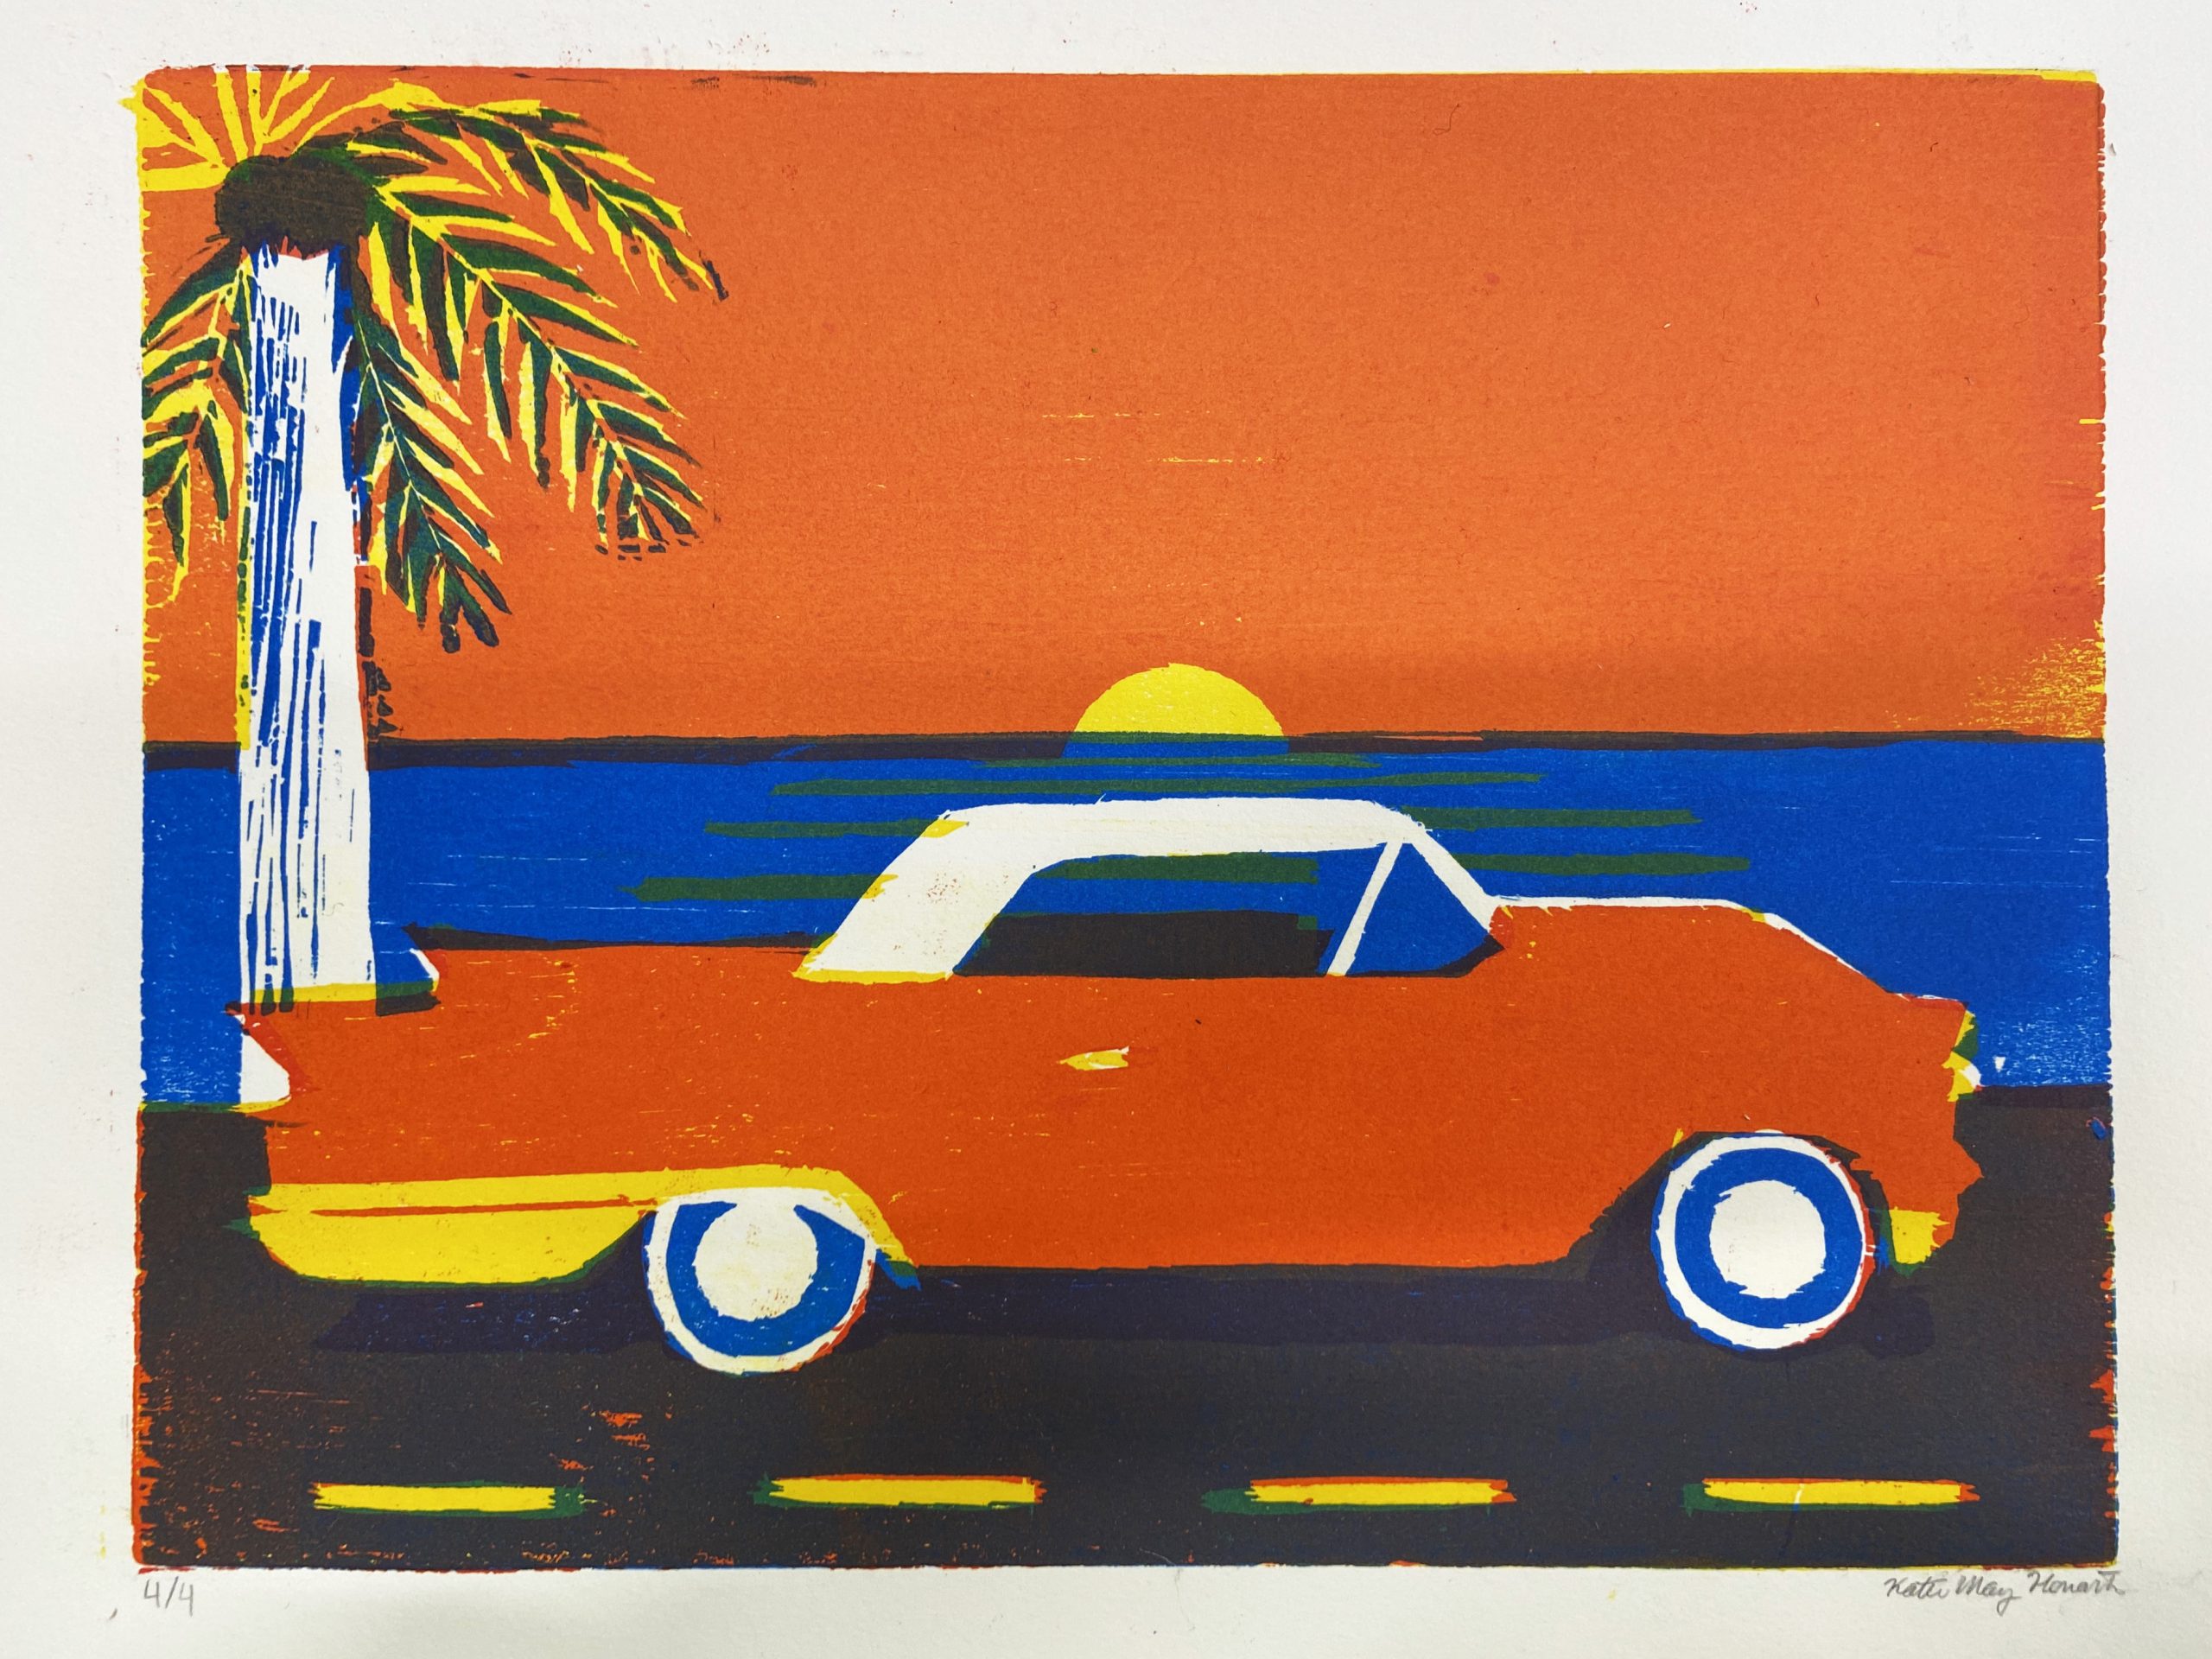 Colorful art print of a vintage car by a beach with a palm tree in the background, by Katie May Howarth